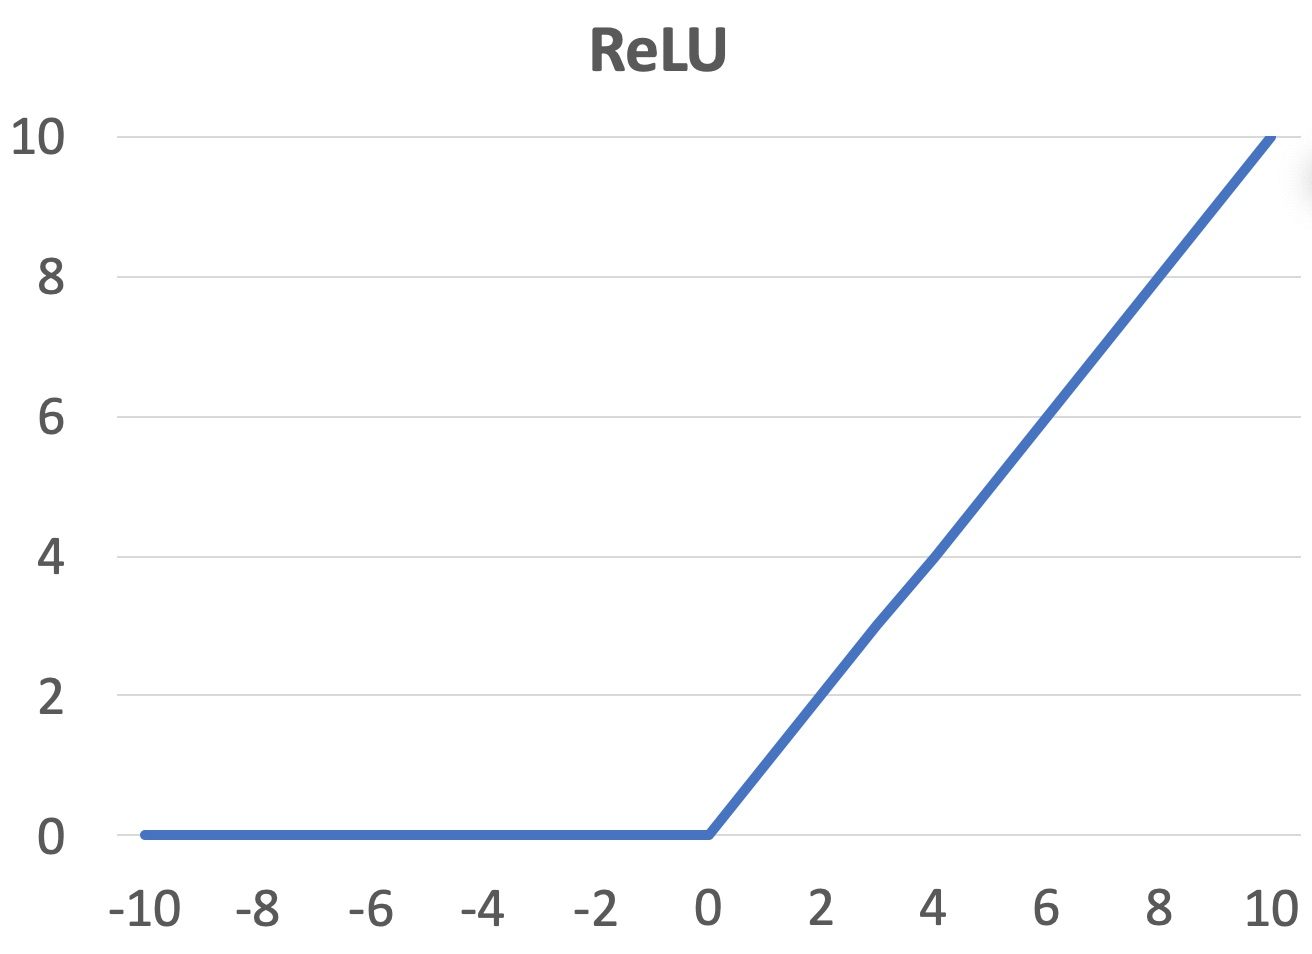 Plot of the ReLU activation function